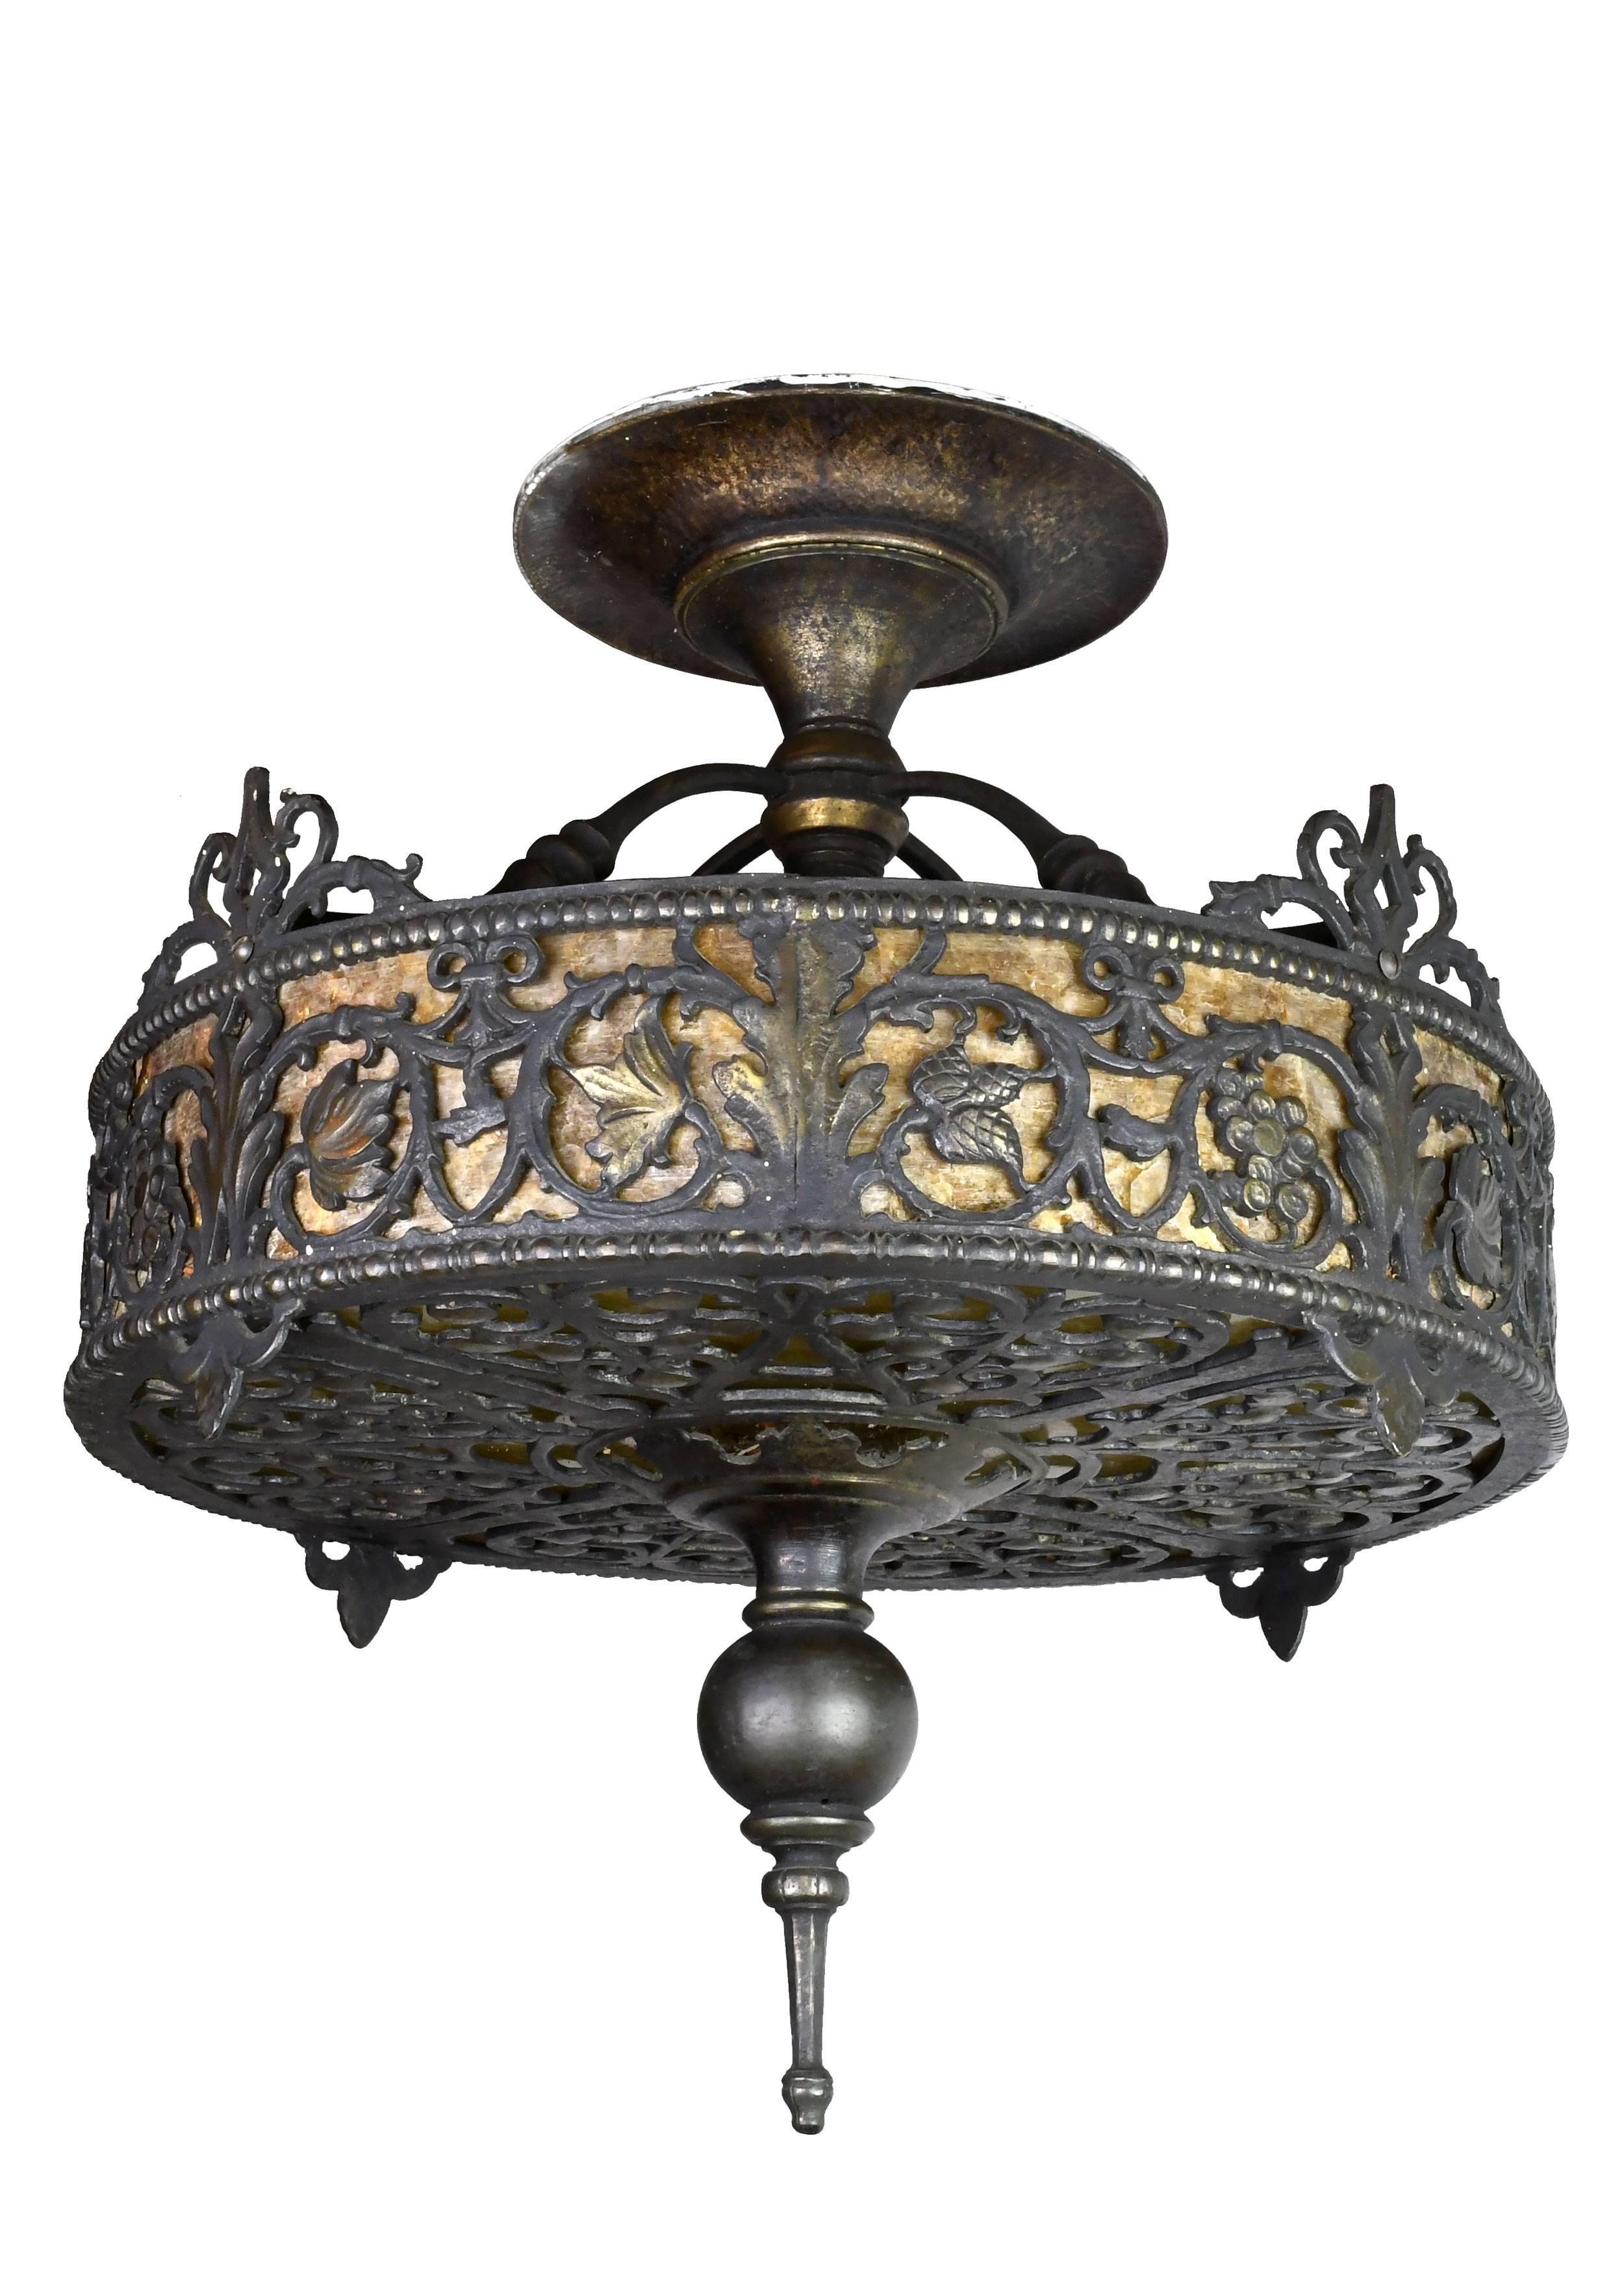 Attributed to craftsman Oscar Bach, one of the most skilled and stylistically diverse metalworkers of the early 20th century, this incredible flush mount chandelier is alive with intricate details. Bronze metalwork weaves its way over rich mica